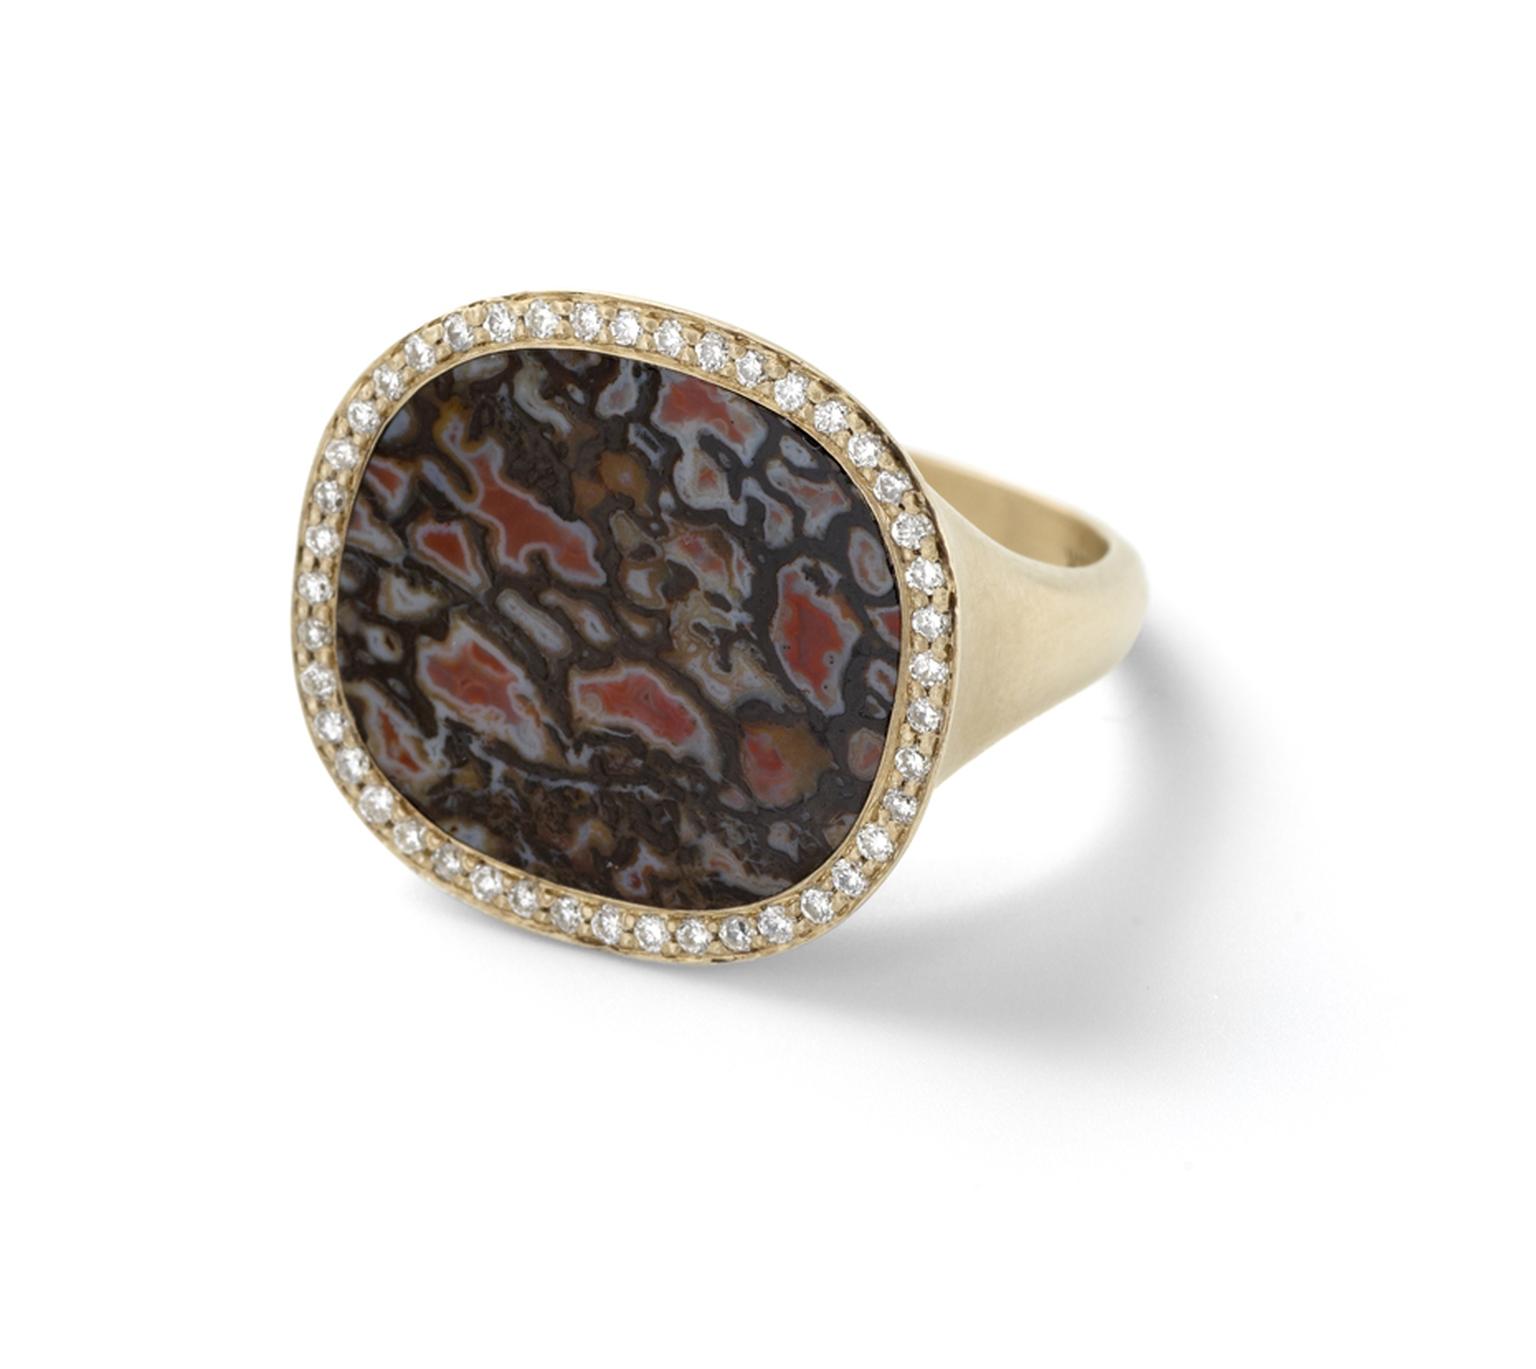 Monique Péan fossilized dinosaur bone ring in recycled yellow gold with diamond pavé.